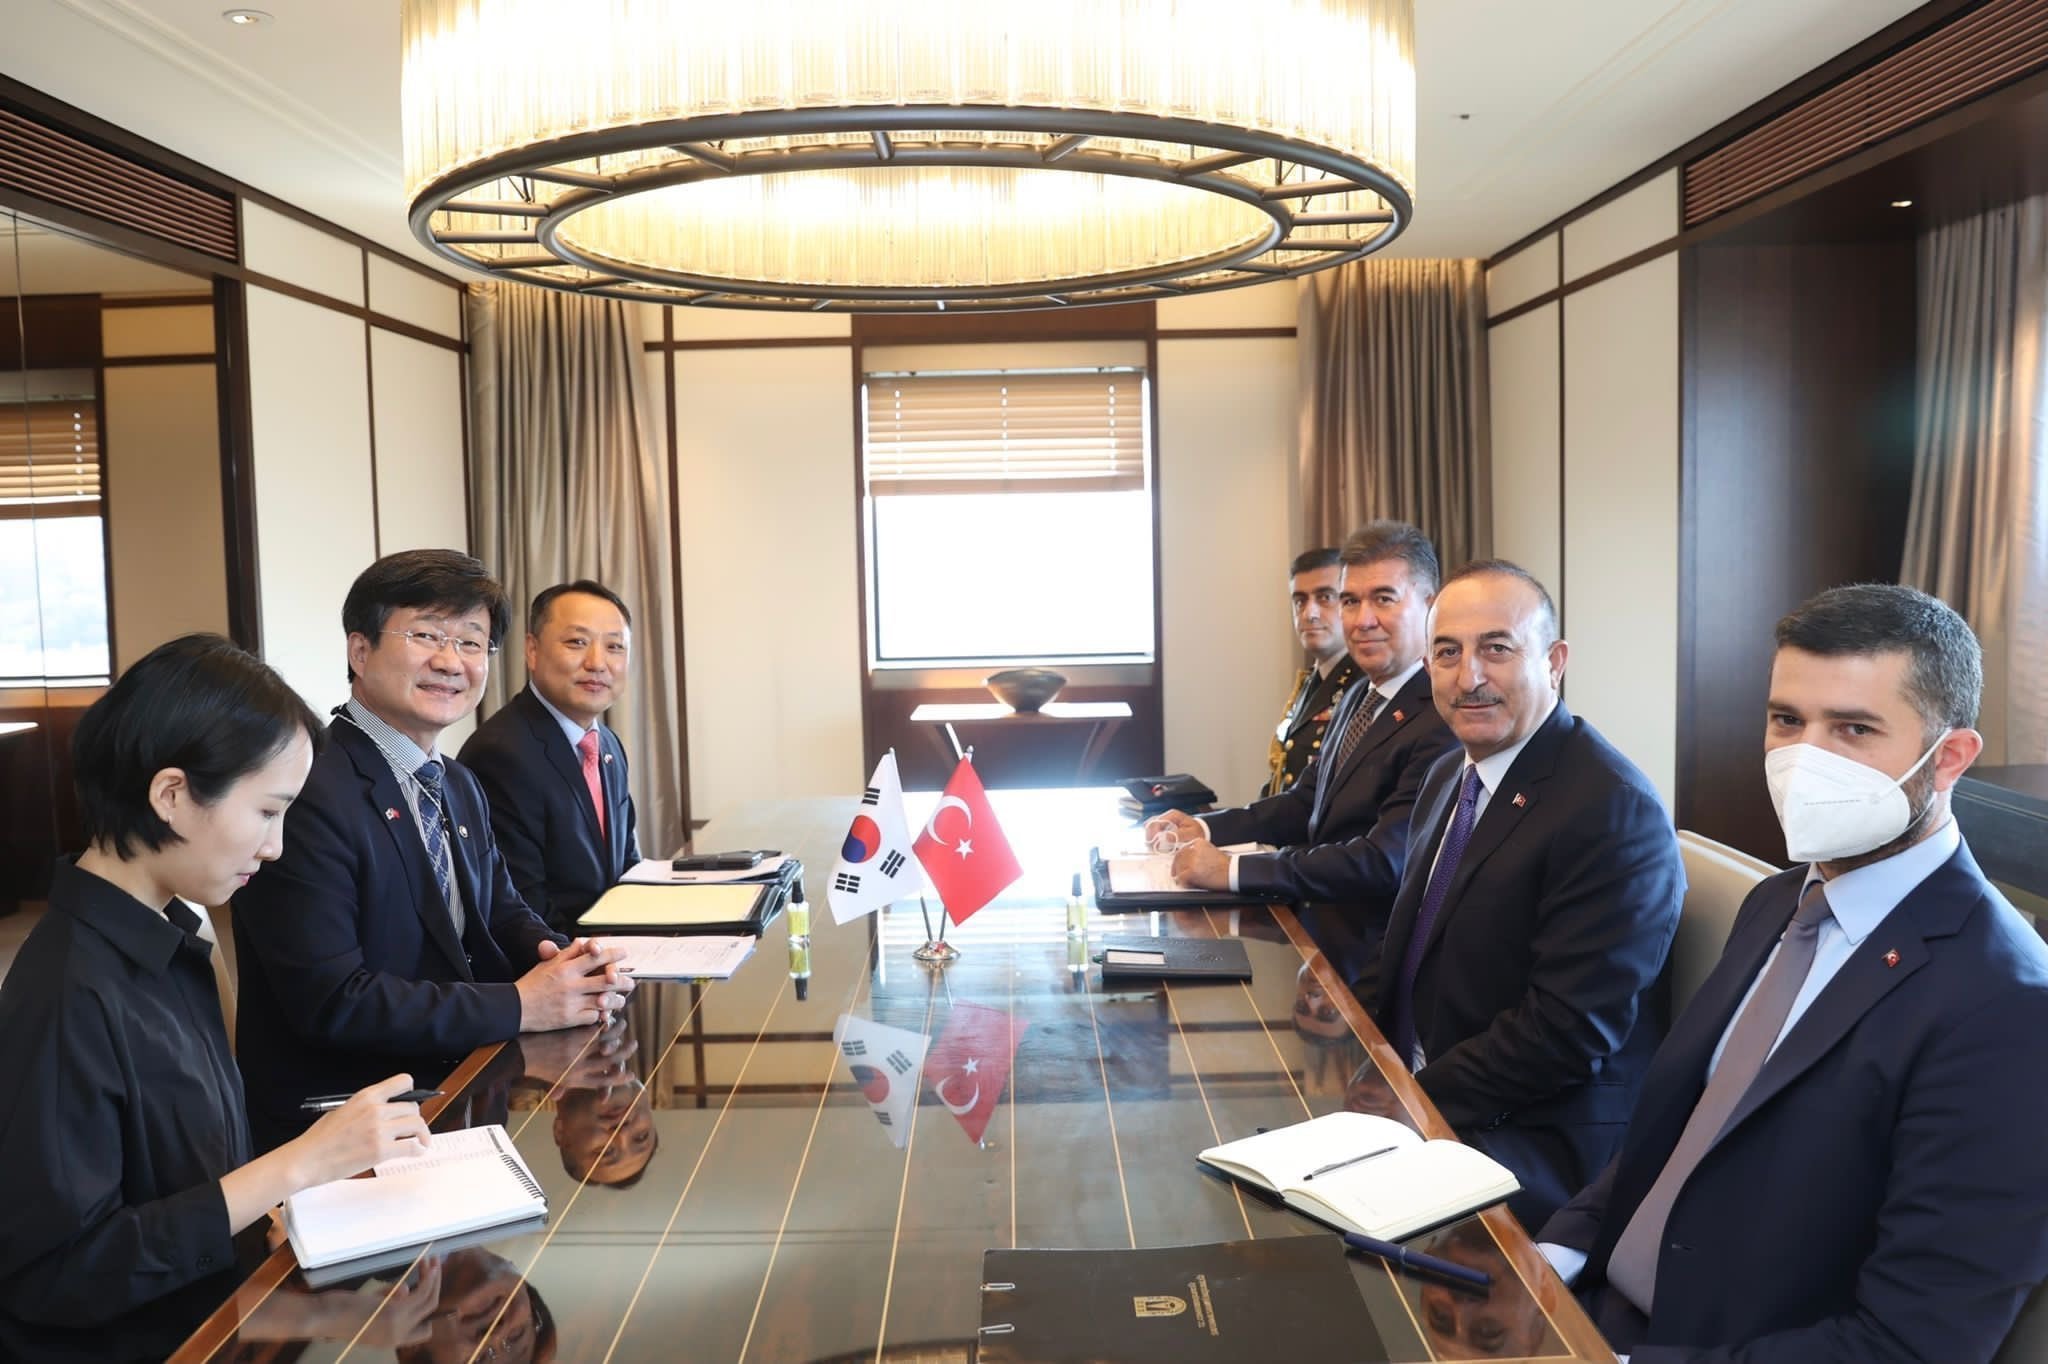 Foreign Minister Mevlüt Çavuşoğlu accompanied by a Turkish delegation during a meeting with a South Korean delegation led by Minister Kang Eun-ho, the minister responsible for the Defense Procurement Program, Seoul, South Korea, Oct. 22, 2021. (DHA Photo)